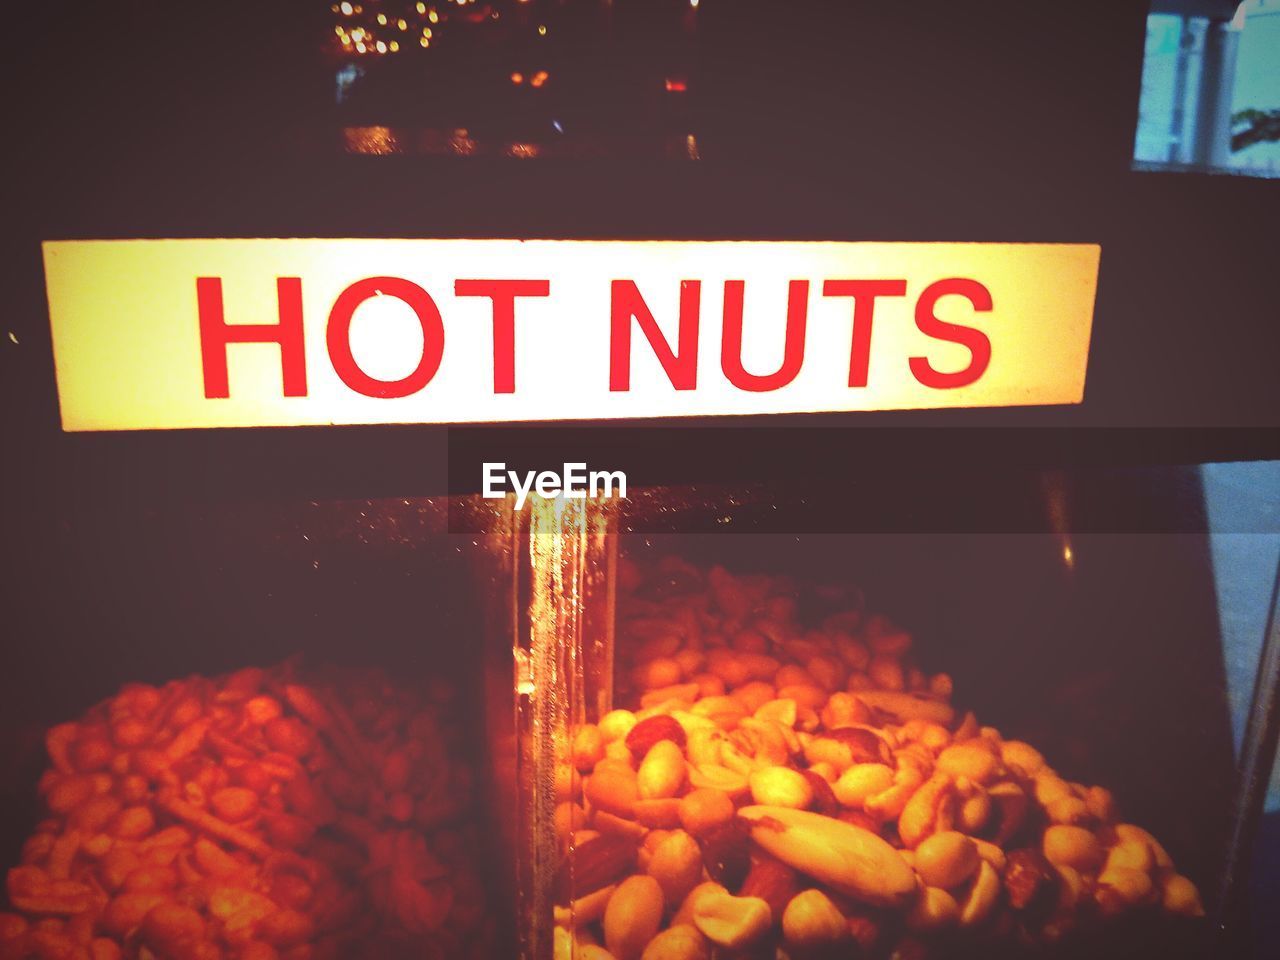 Hot nuts for sale at night